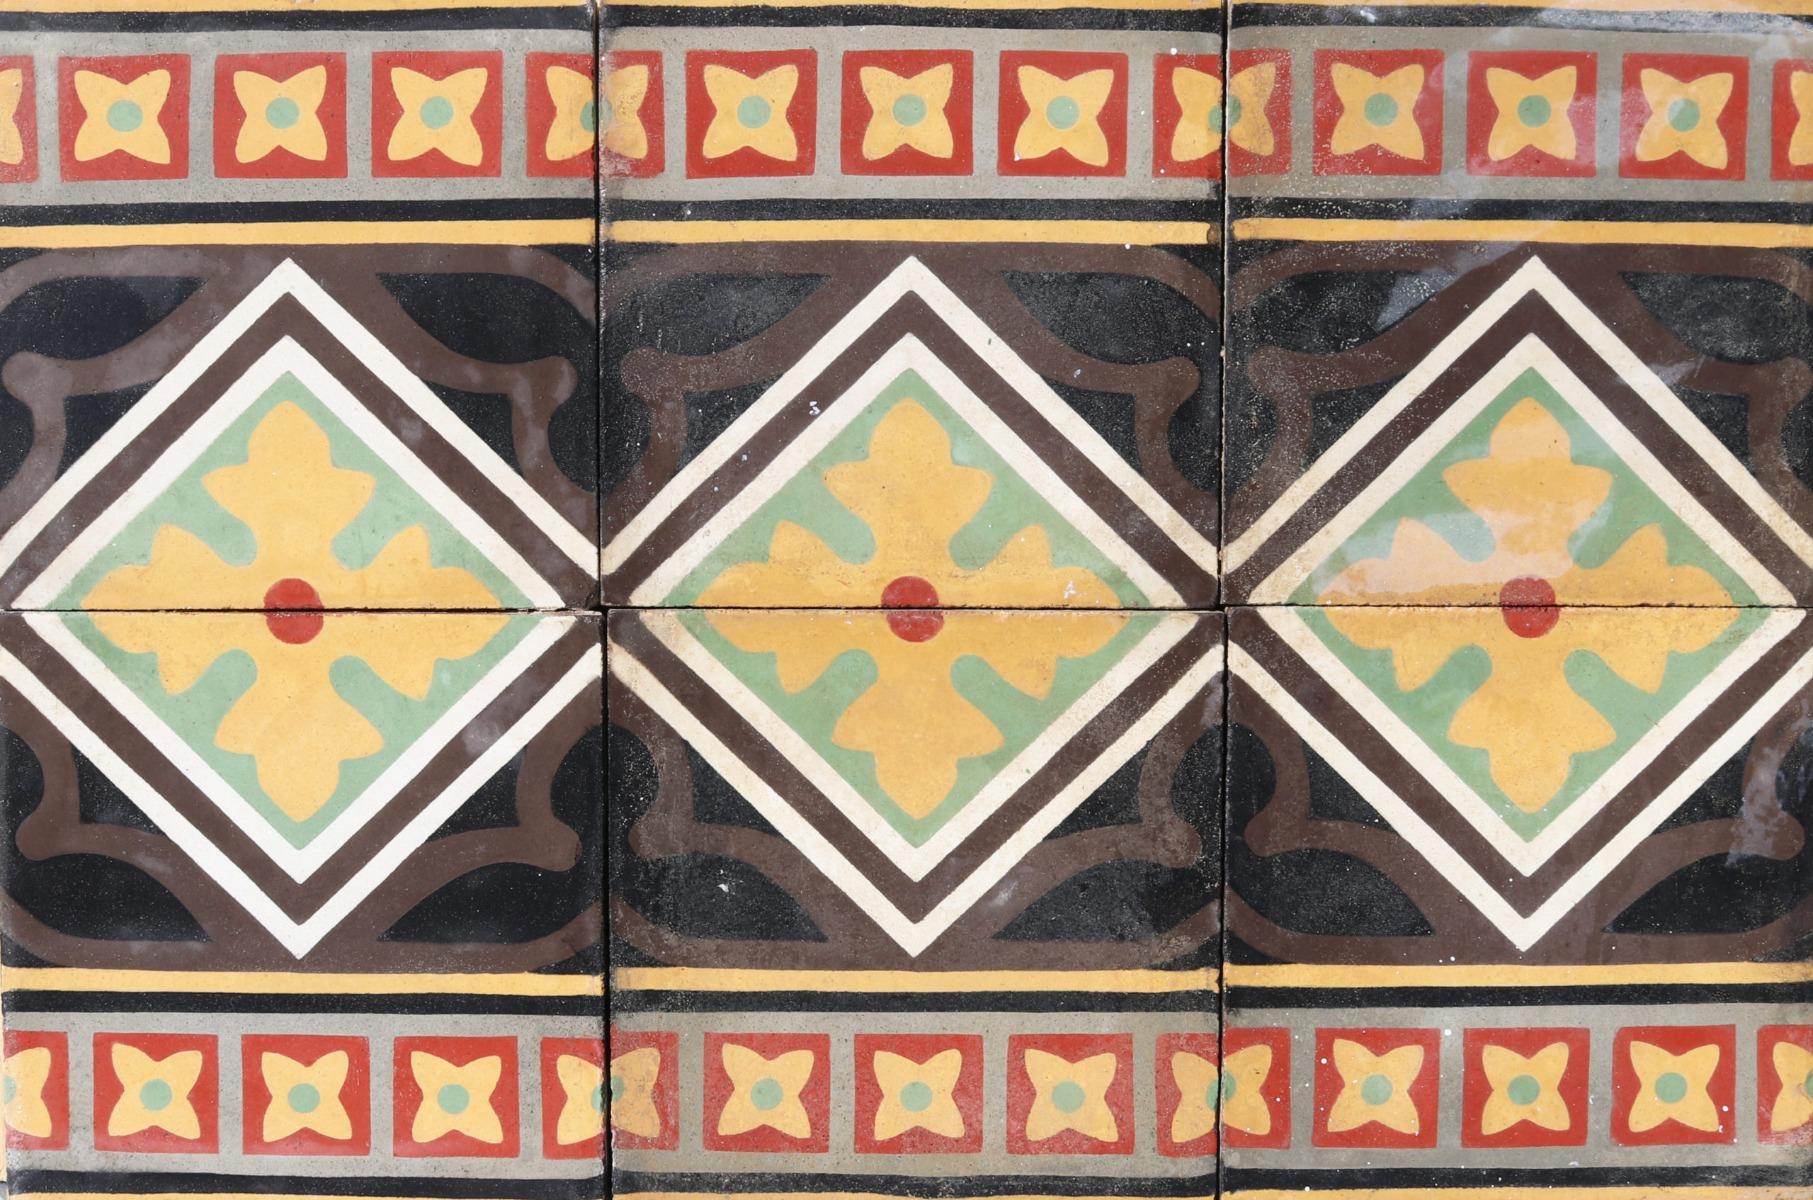 A batch of 41 reclaimed encaustic cement floor tiles. These tiles will cover 1.64 m2 or 17.6 sq. ft. They are suitable for use on floors or walls.